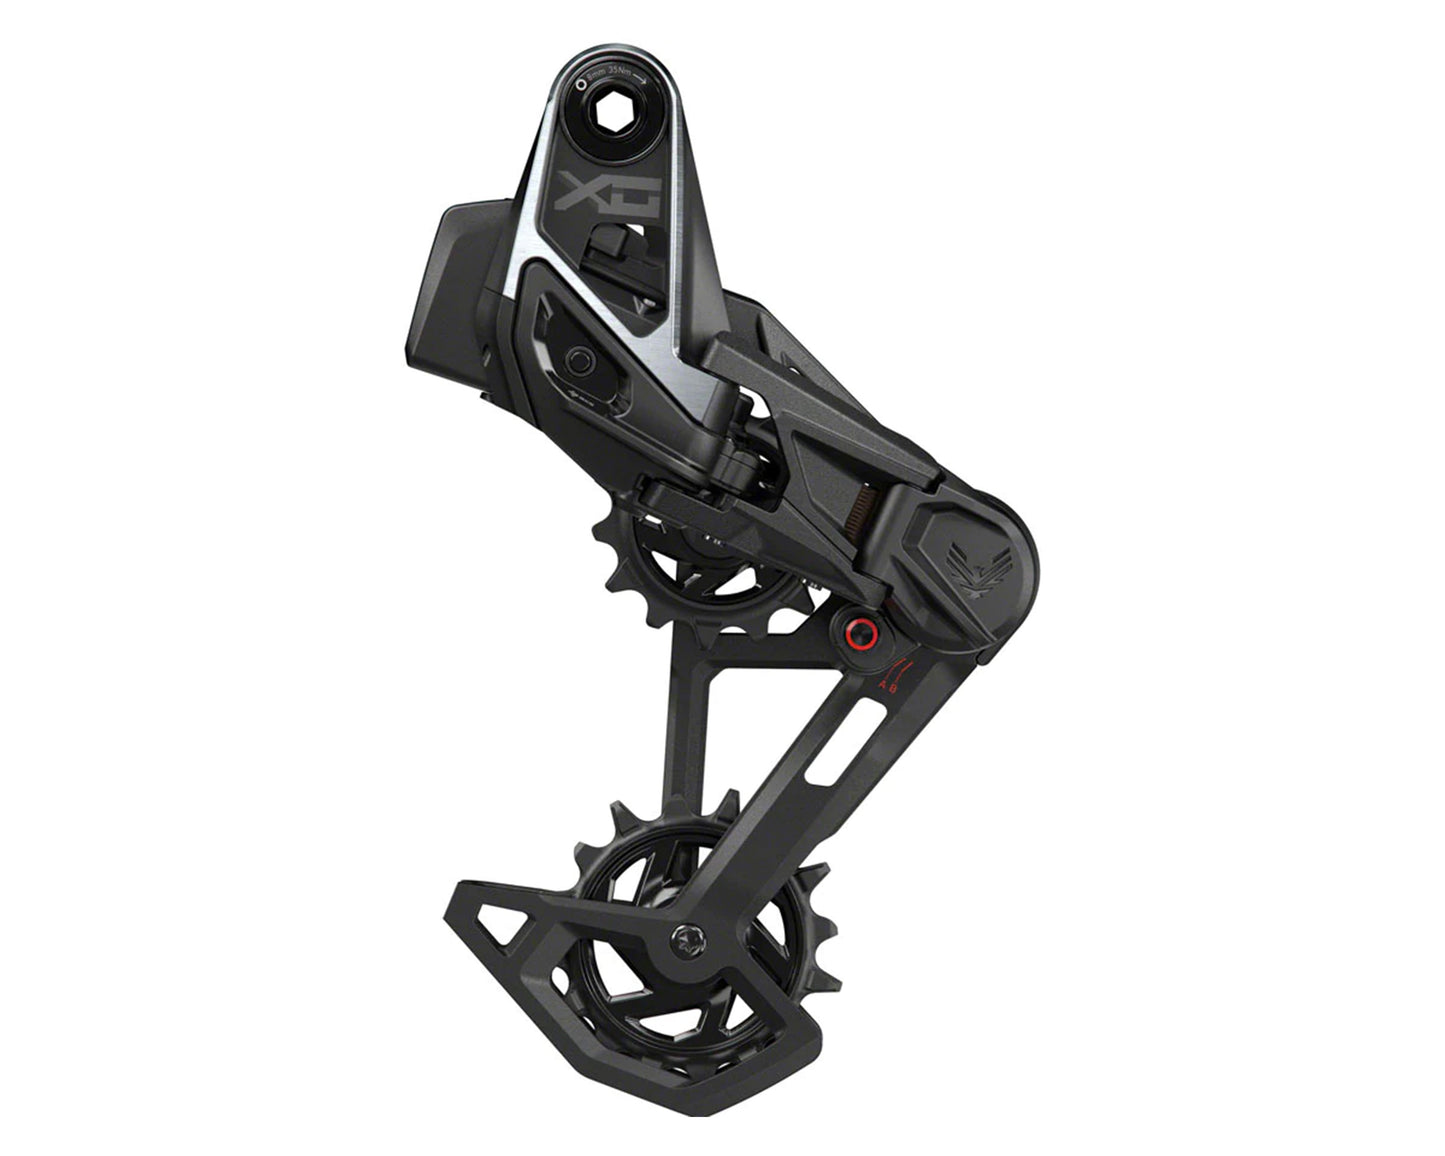 SRAM X0 EAGLE T-TYPE AXS REAR DERAILLEUR - 12-SPEED, 52T MAX, (BATTERY NOT INCLUDED), WHEEL AXLE MOUNT, ALUMINUM CAGE, BLACK/SILVER